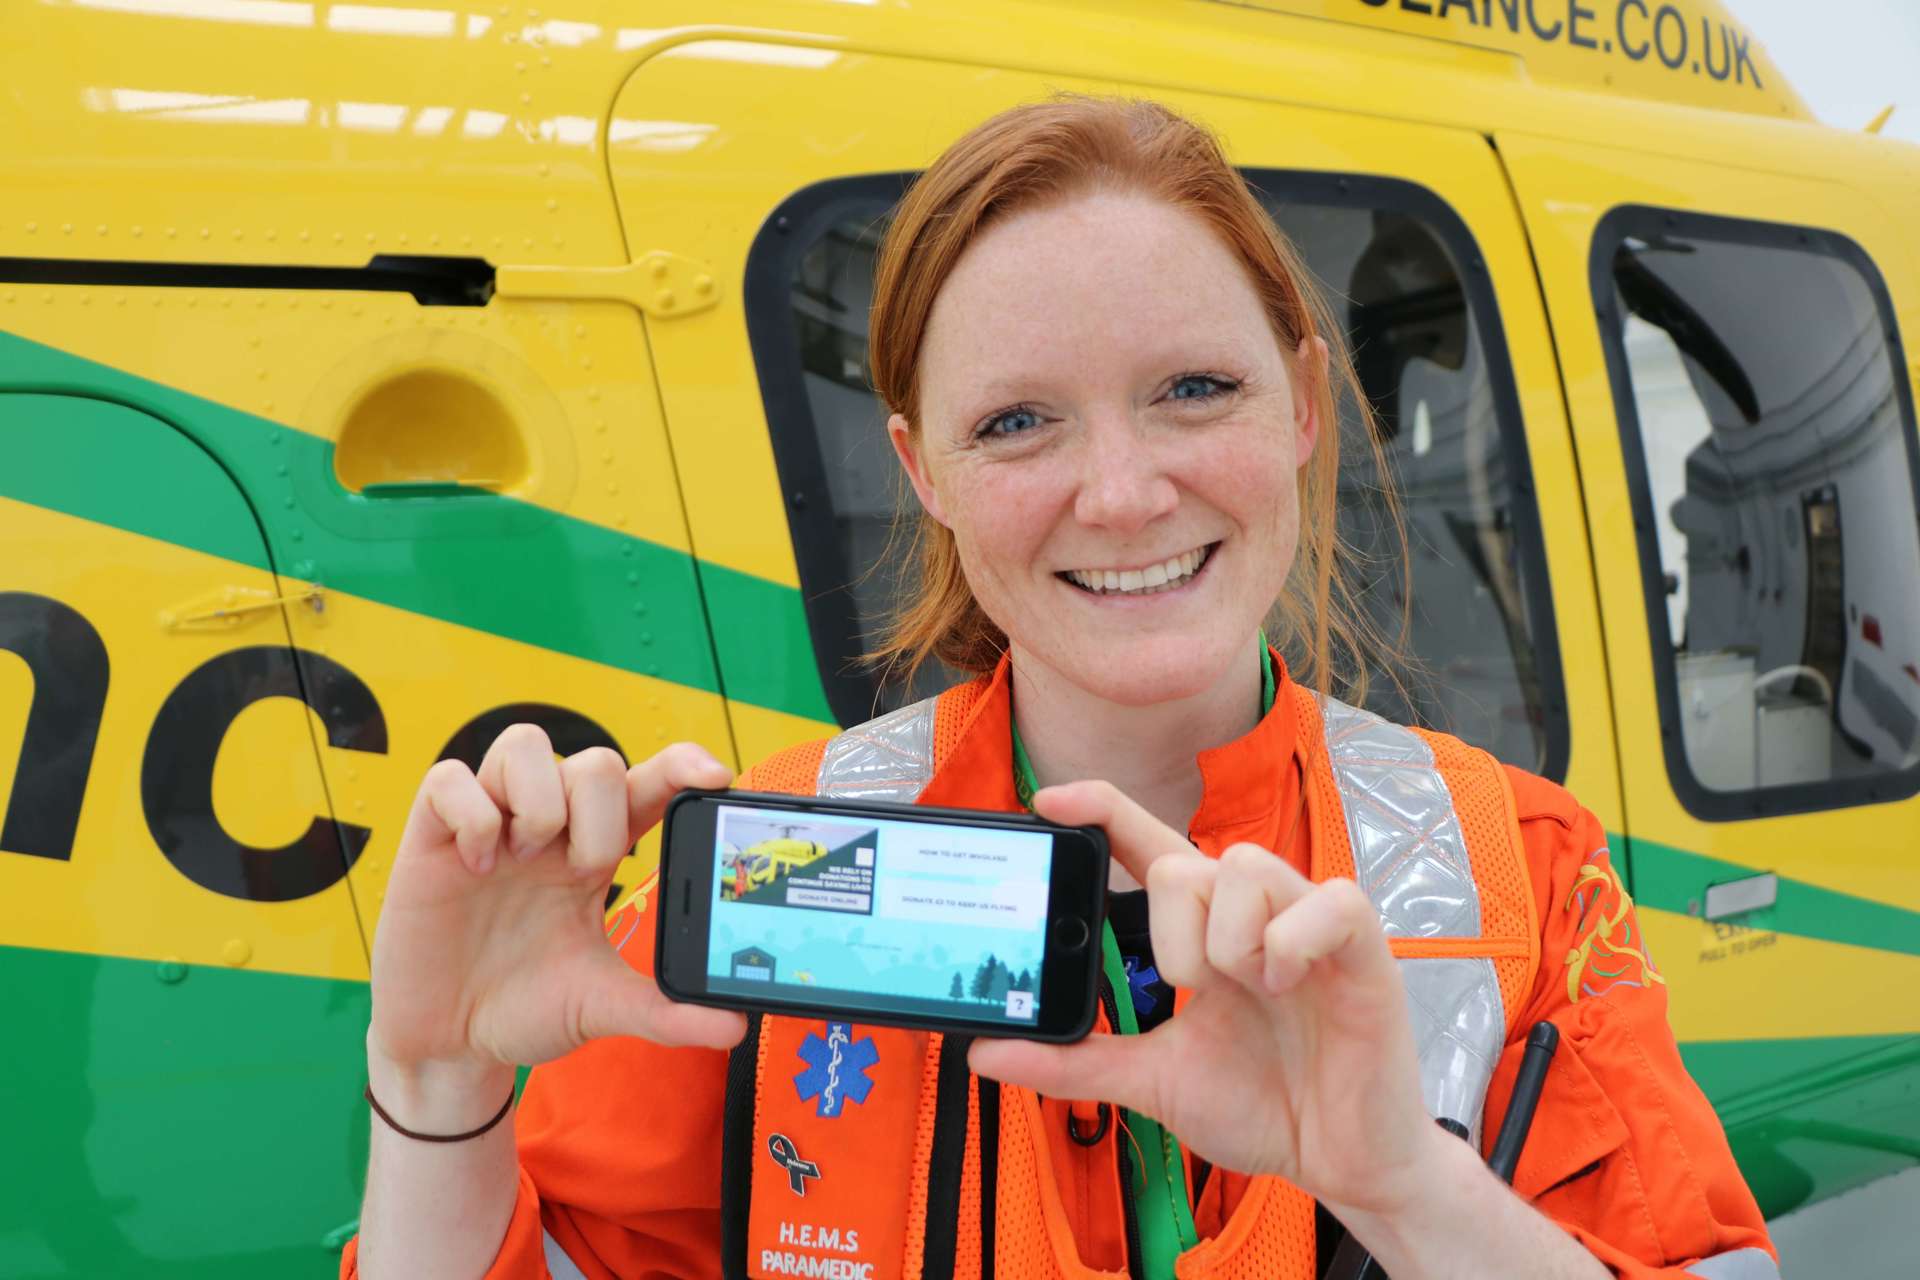 A critical care paramedic stood holding a phone with the app Helifun on screen.